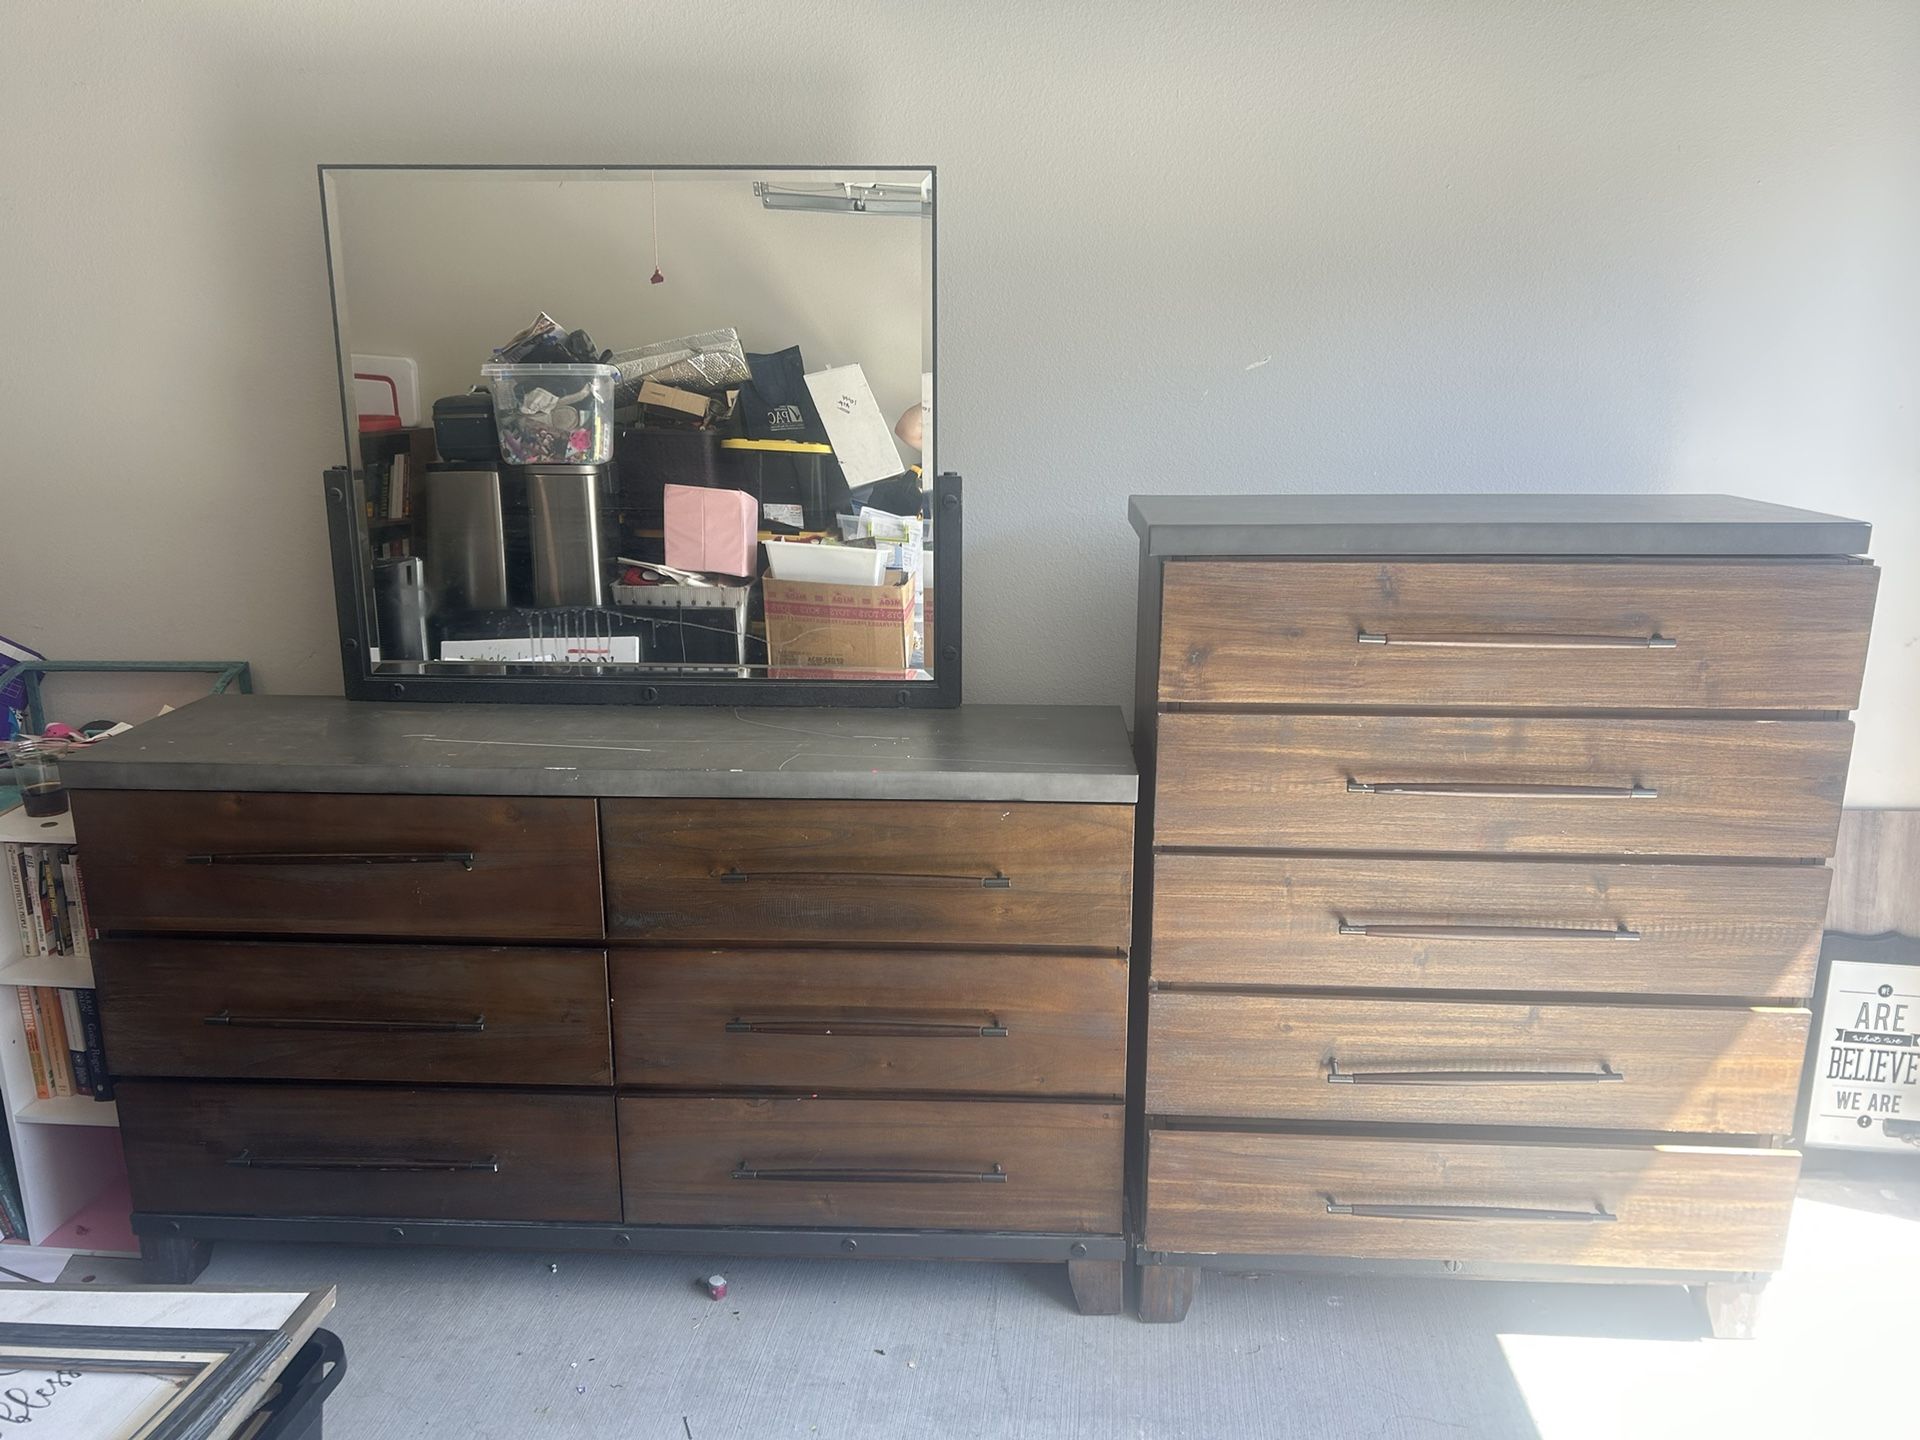 2 dressers (one with attached mirror) 